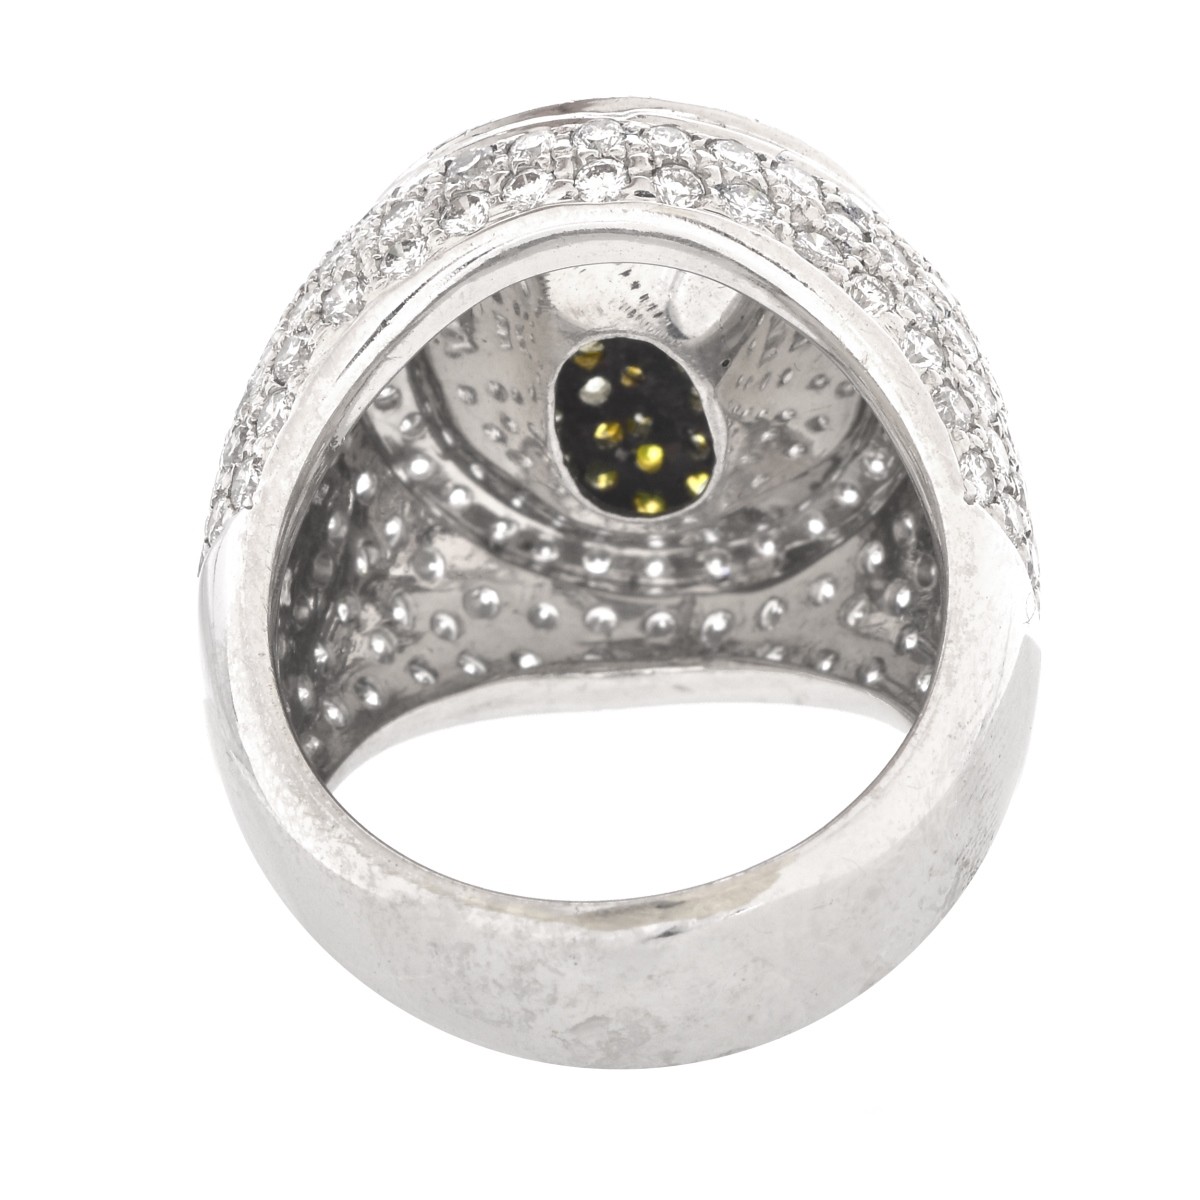 Man's Approx. 5.0 Carat Diamond and 14K Gold Ring